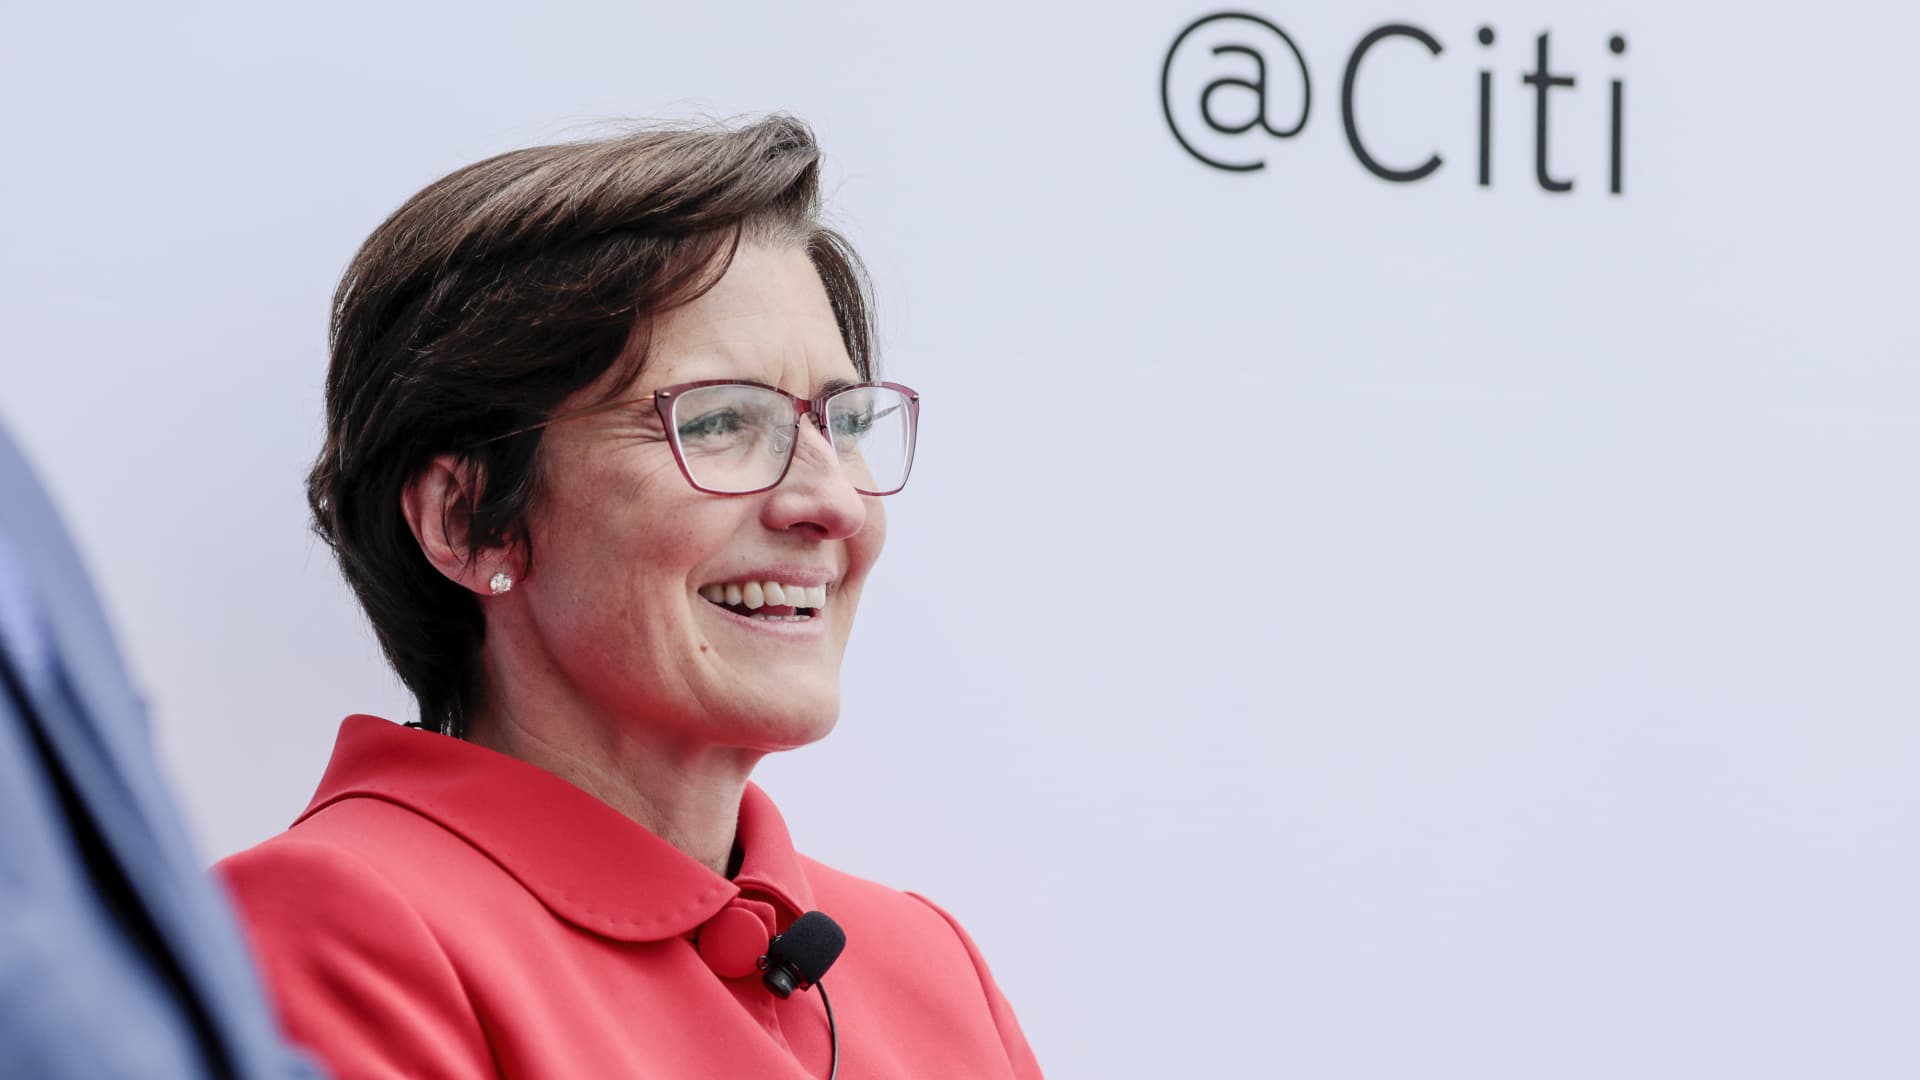 Jane Fraser, chief executive officer for Latin American at Citigroup Inc., smiles during the Milken Institute Global Conference in Beverly Hills, California, U.S., on Monday, April 29, 2019. The conference brings together leaders in business, government, technology, philanthropy, academia, and the media to discuss actionable and collaborative solutions to some of the most important questions of our time. Photographer: Kyle Grillot/Bloomberg via Getty Images